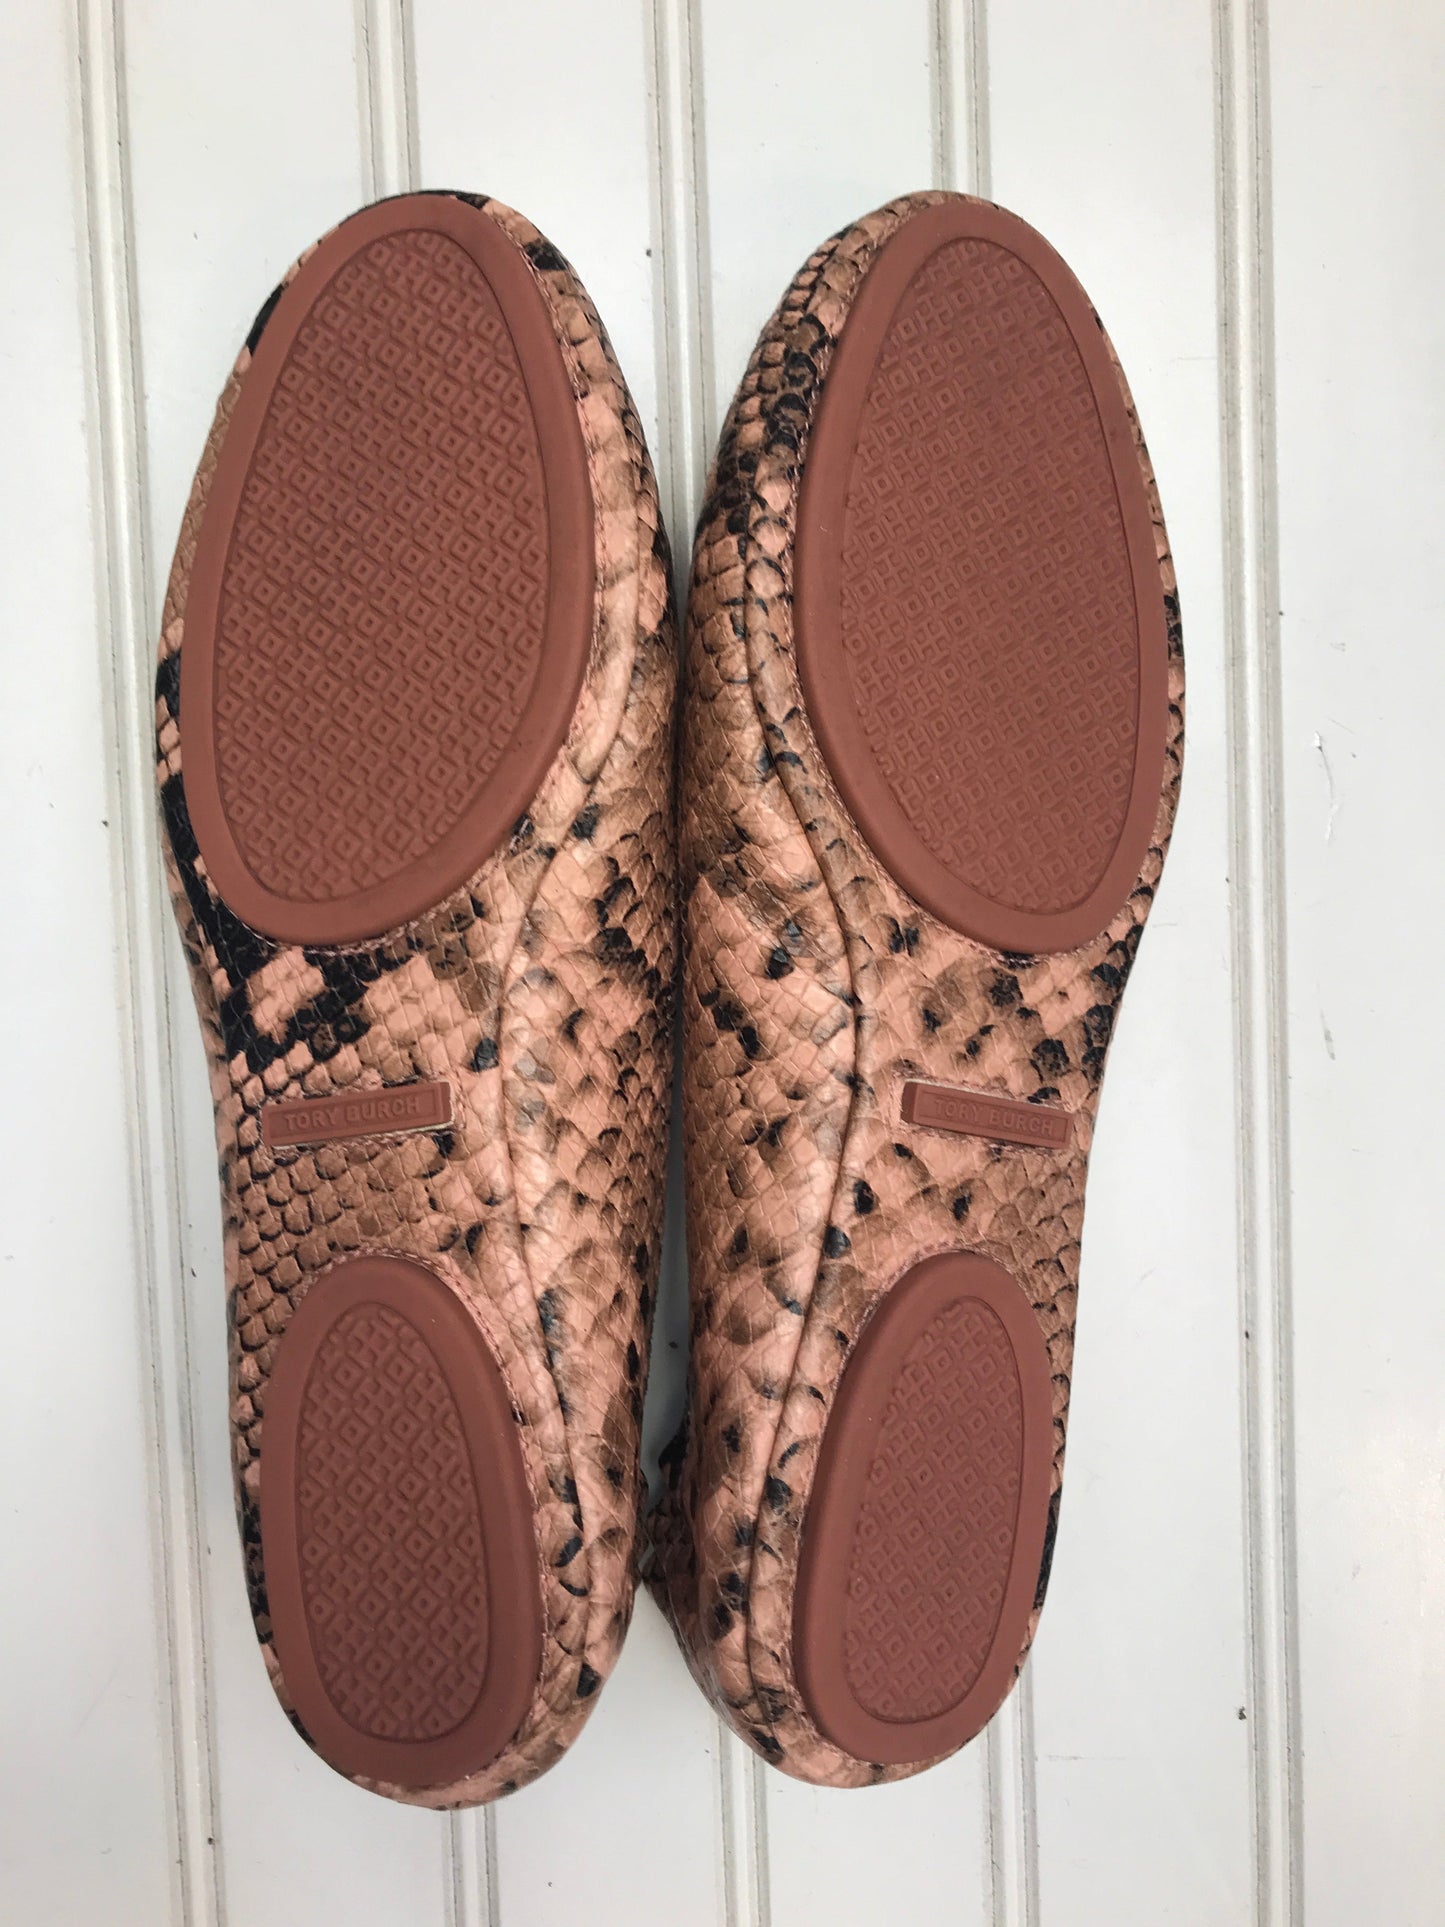 Shoes Designer By Tory Burch  Size: 7